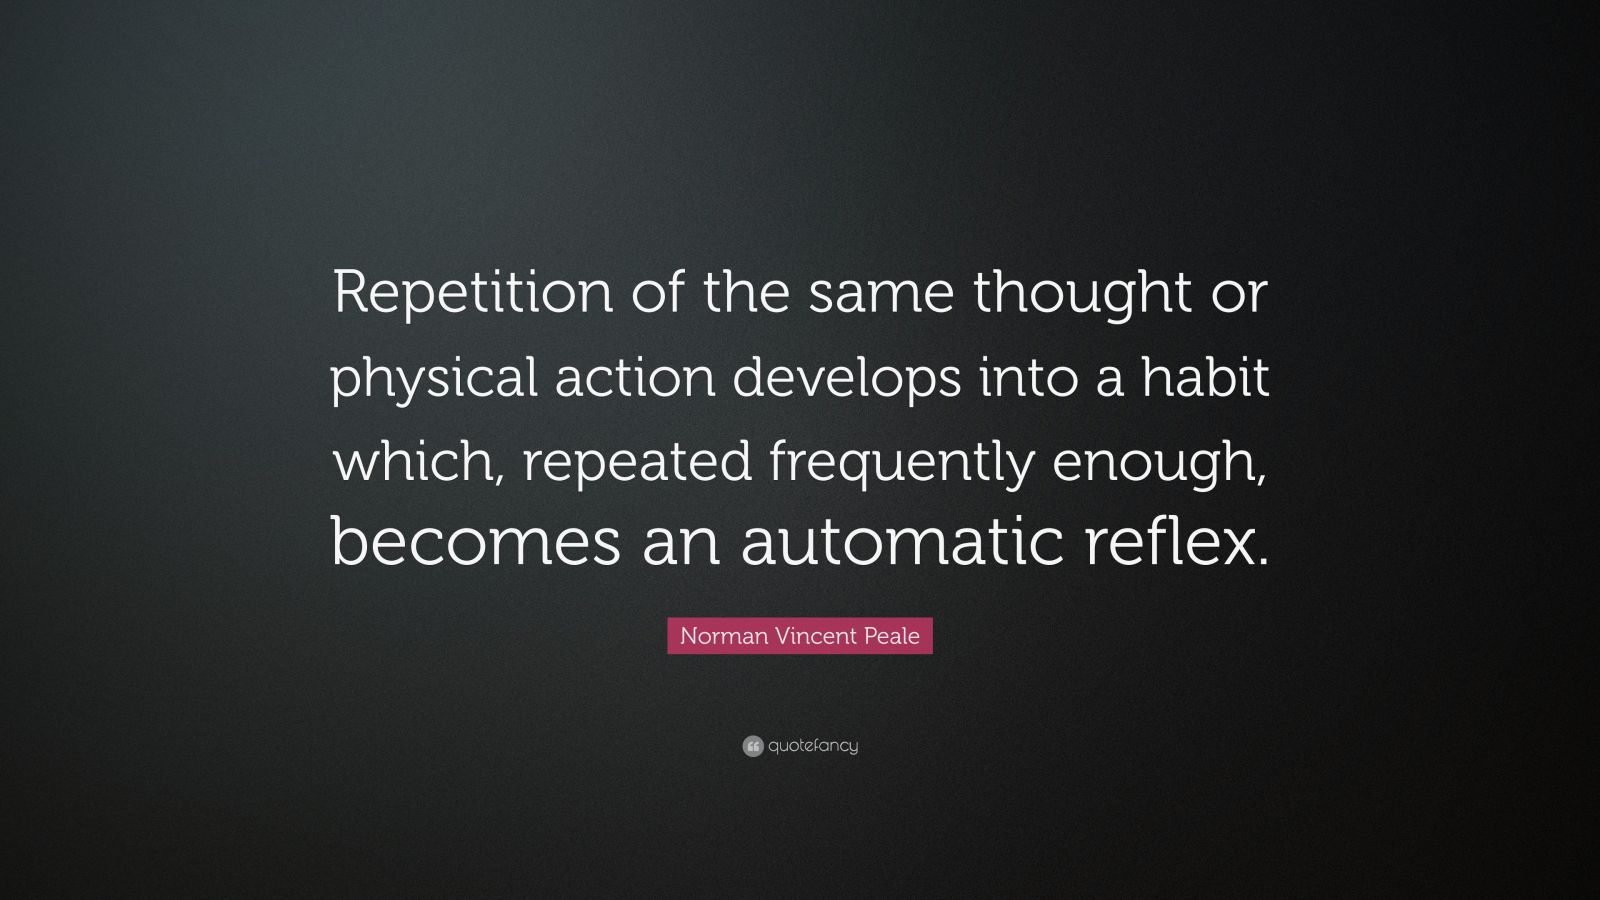 Norman Vincent Peale Quote: “Repetition of the same thought or physical ...